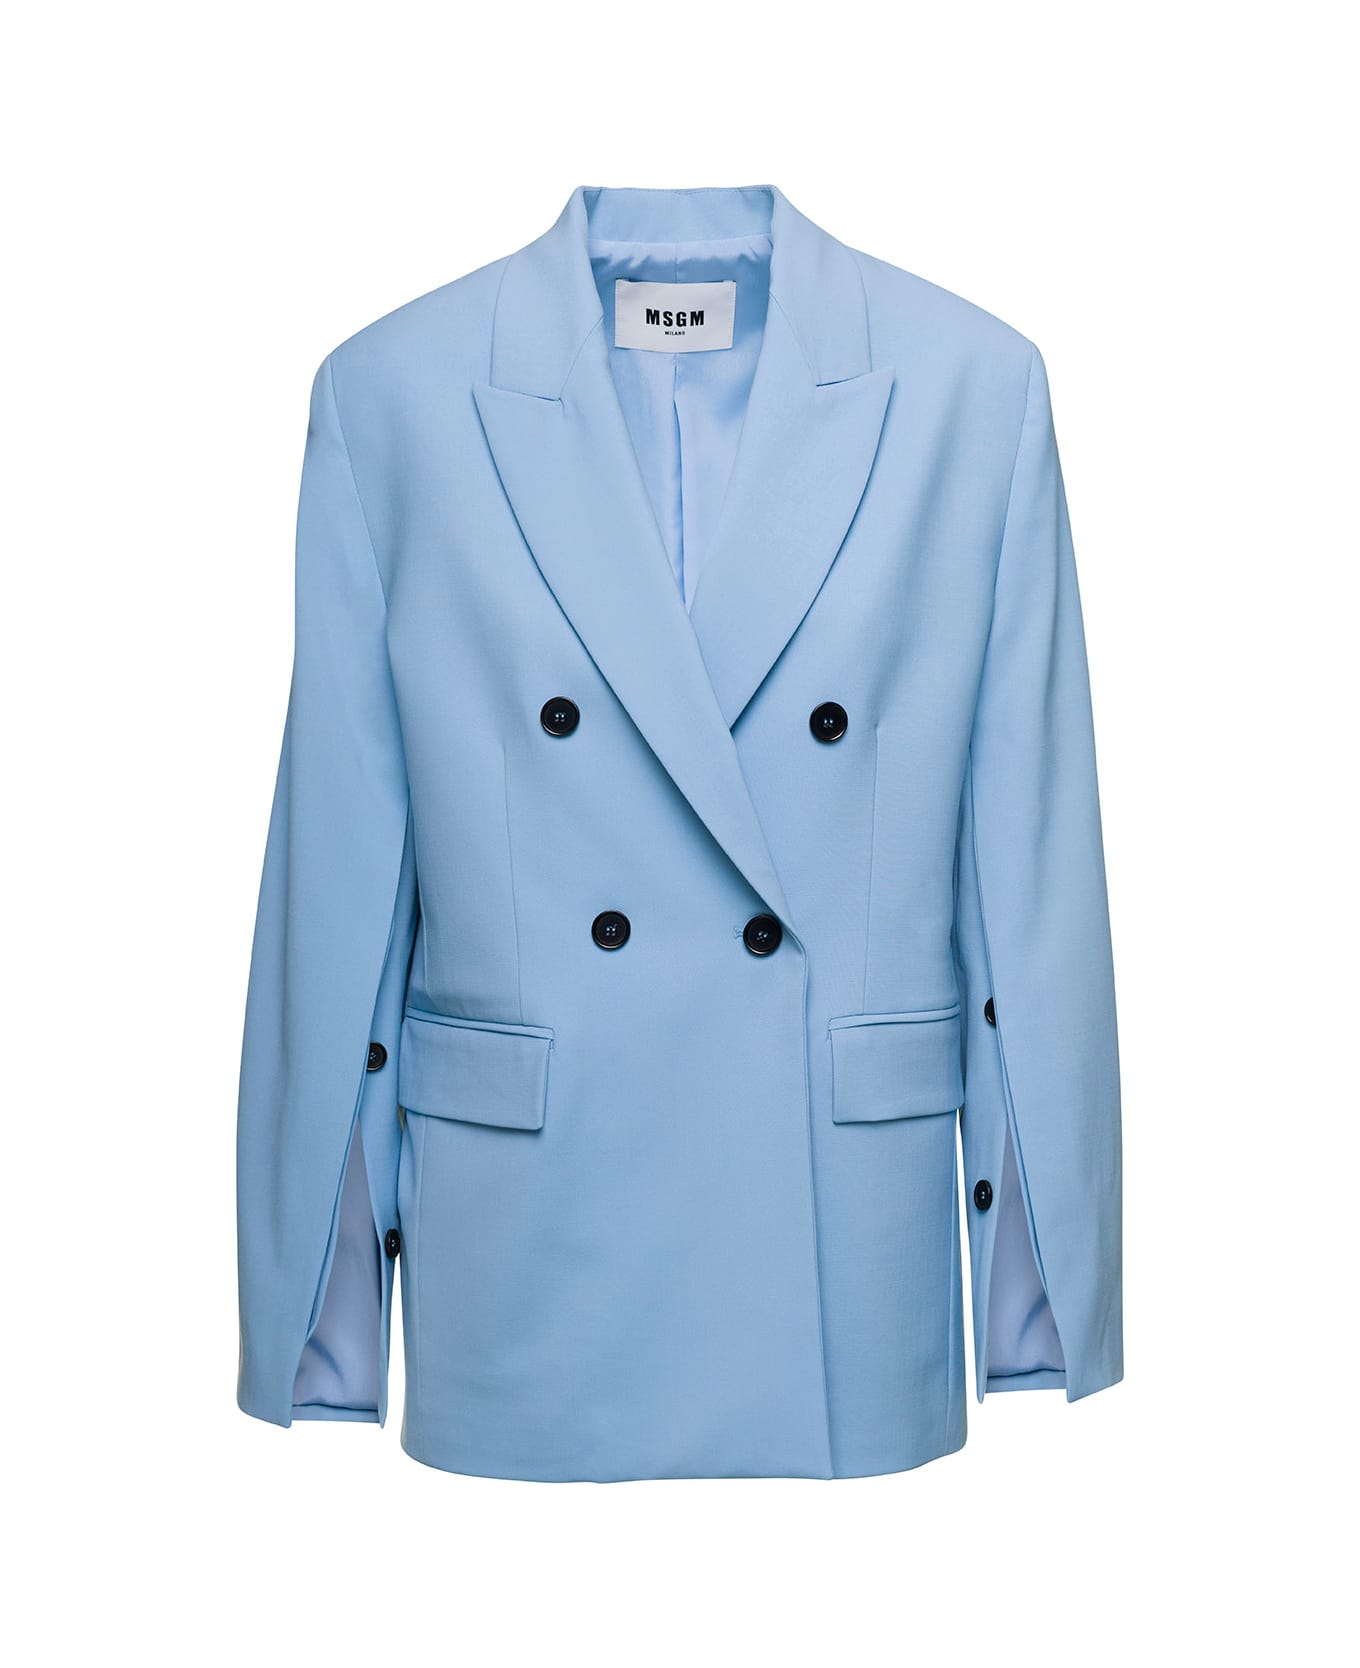 MSGM Light Blue Double-breasted Jacket With Buttoned Sleeves In Stretch Wool Woman - Blu